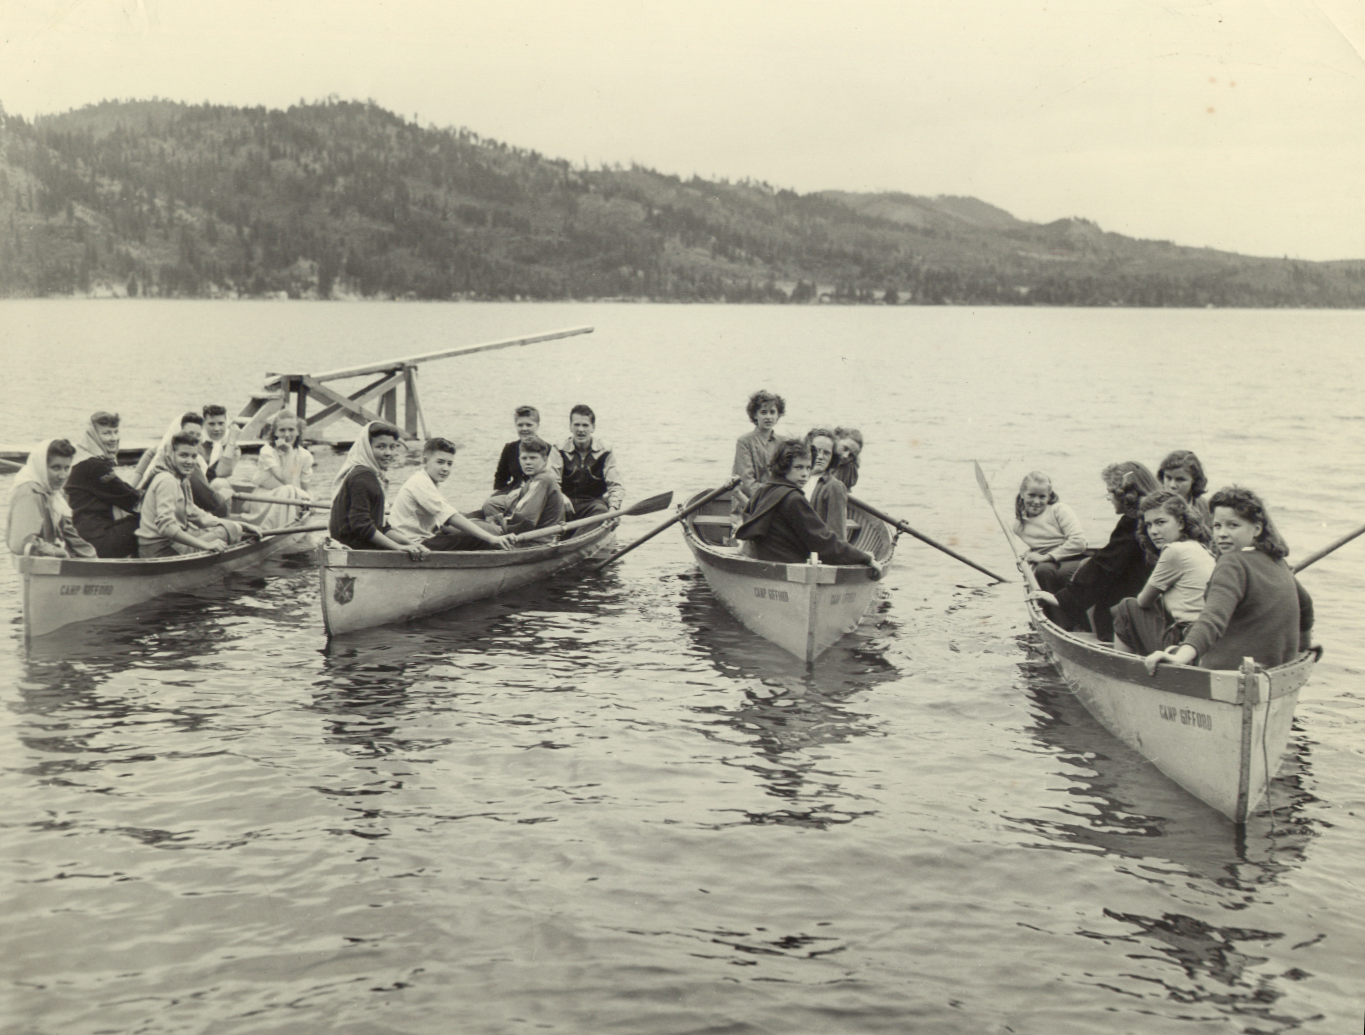 Celebrating 100 years of Camp Gifford